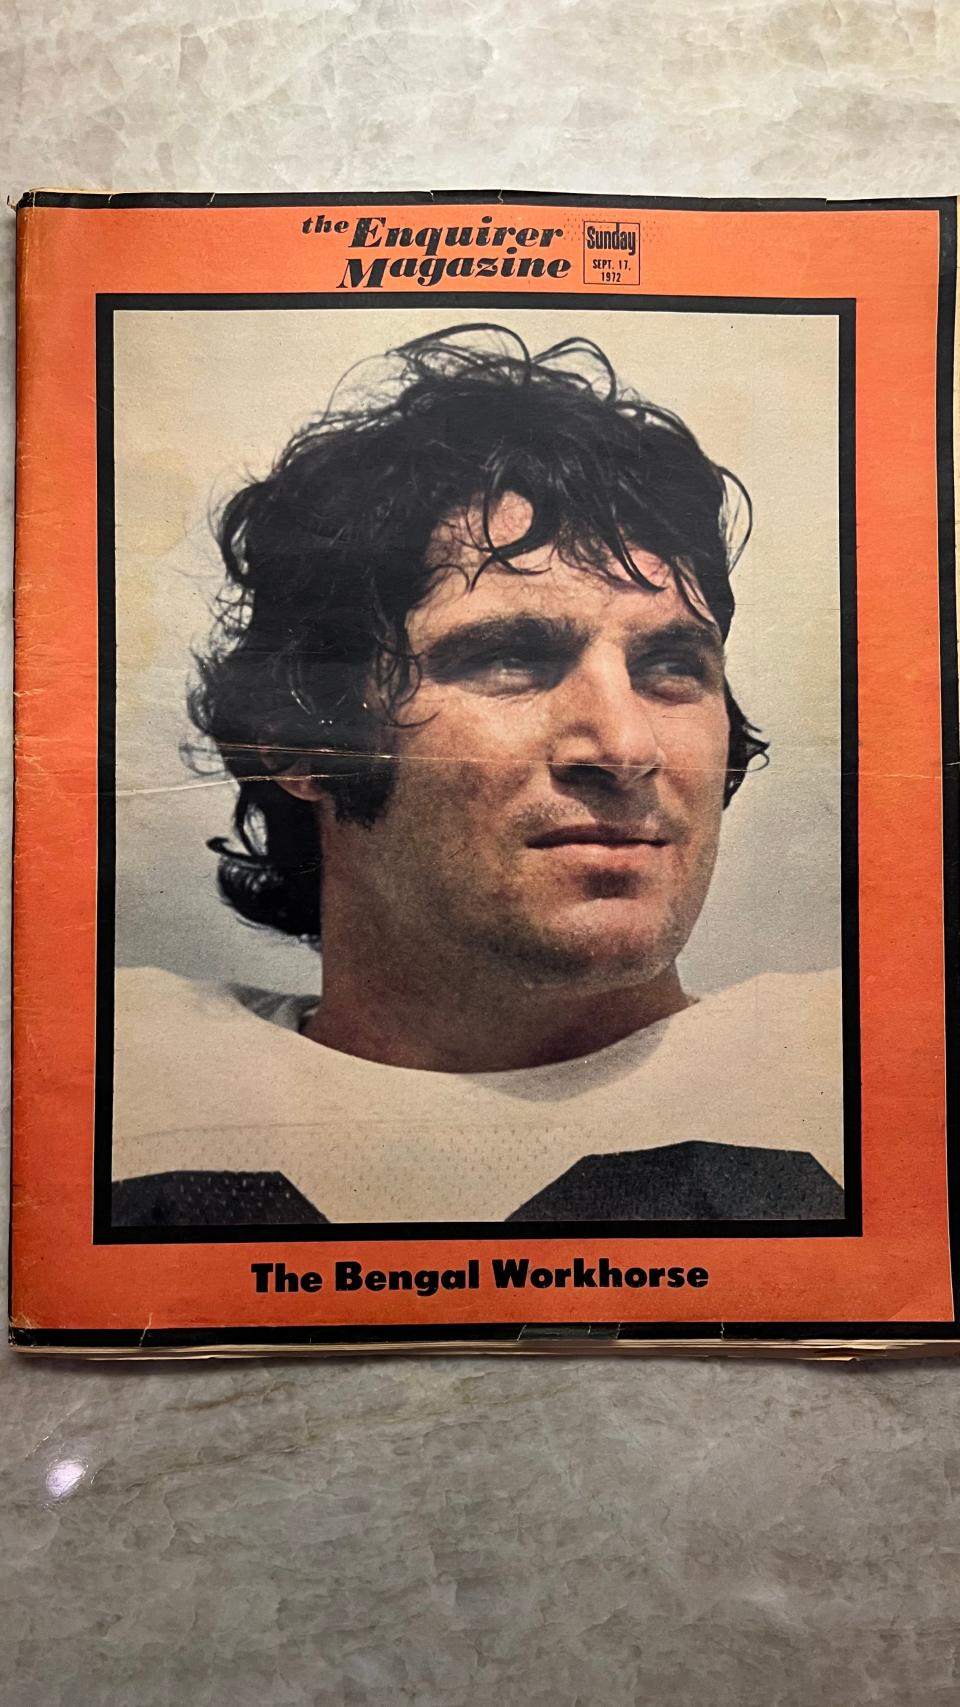 Fred Willis appeared on the cover of Cincinnati's Enquirer Magazine in 1972.